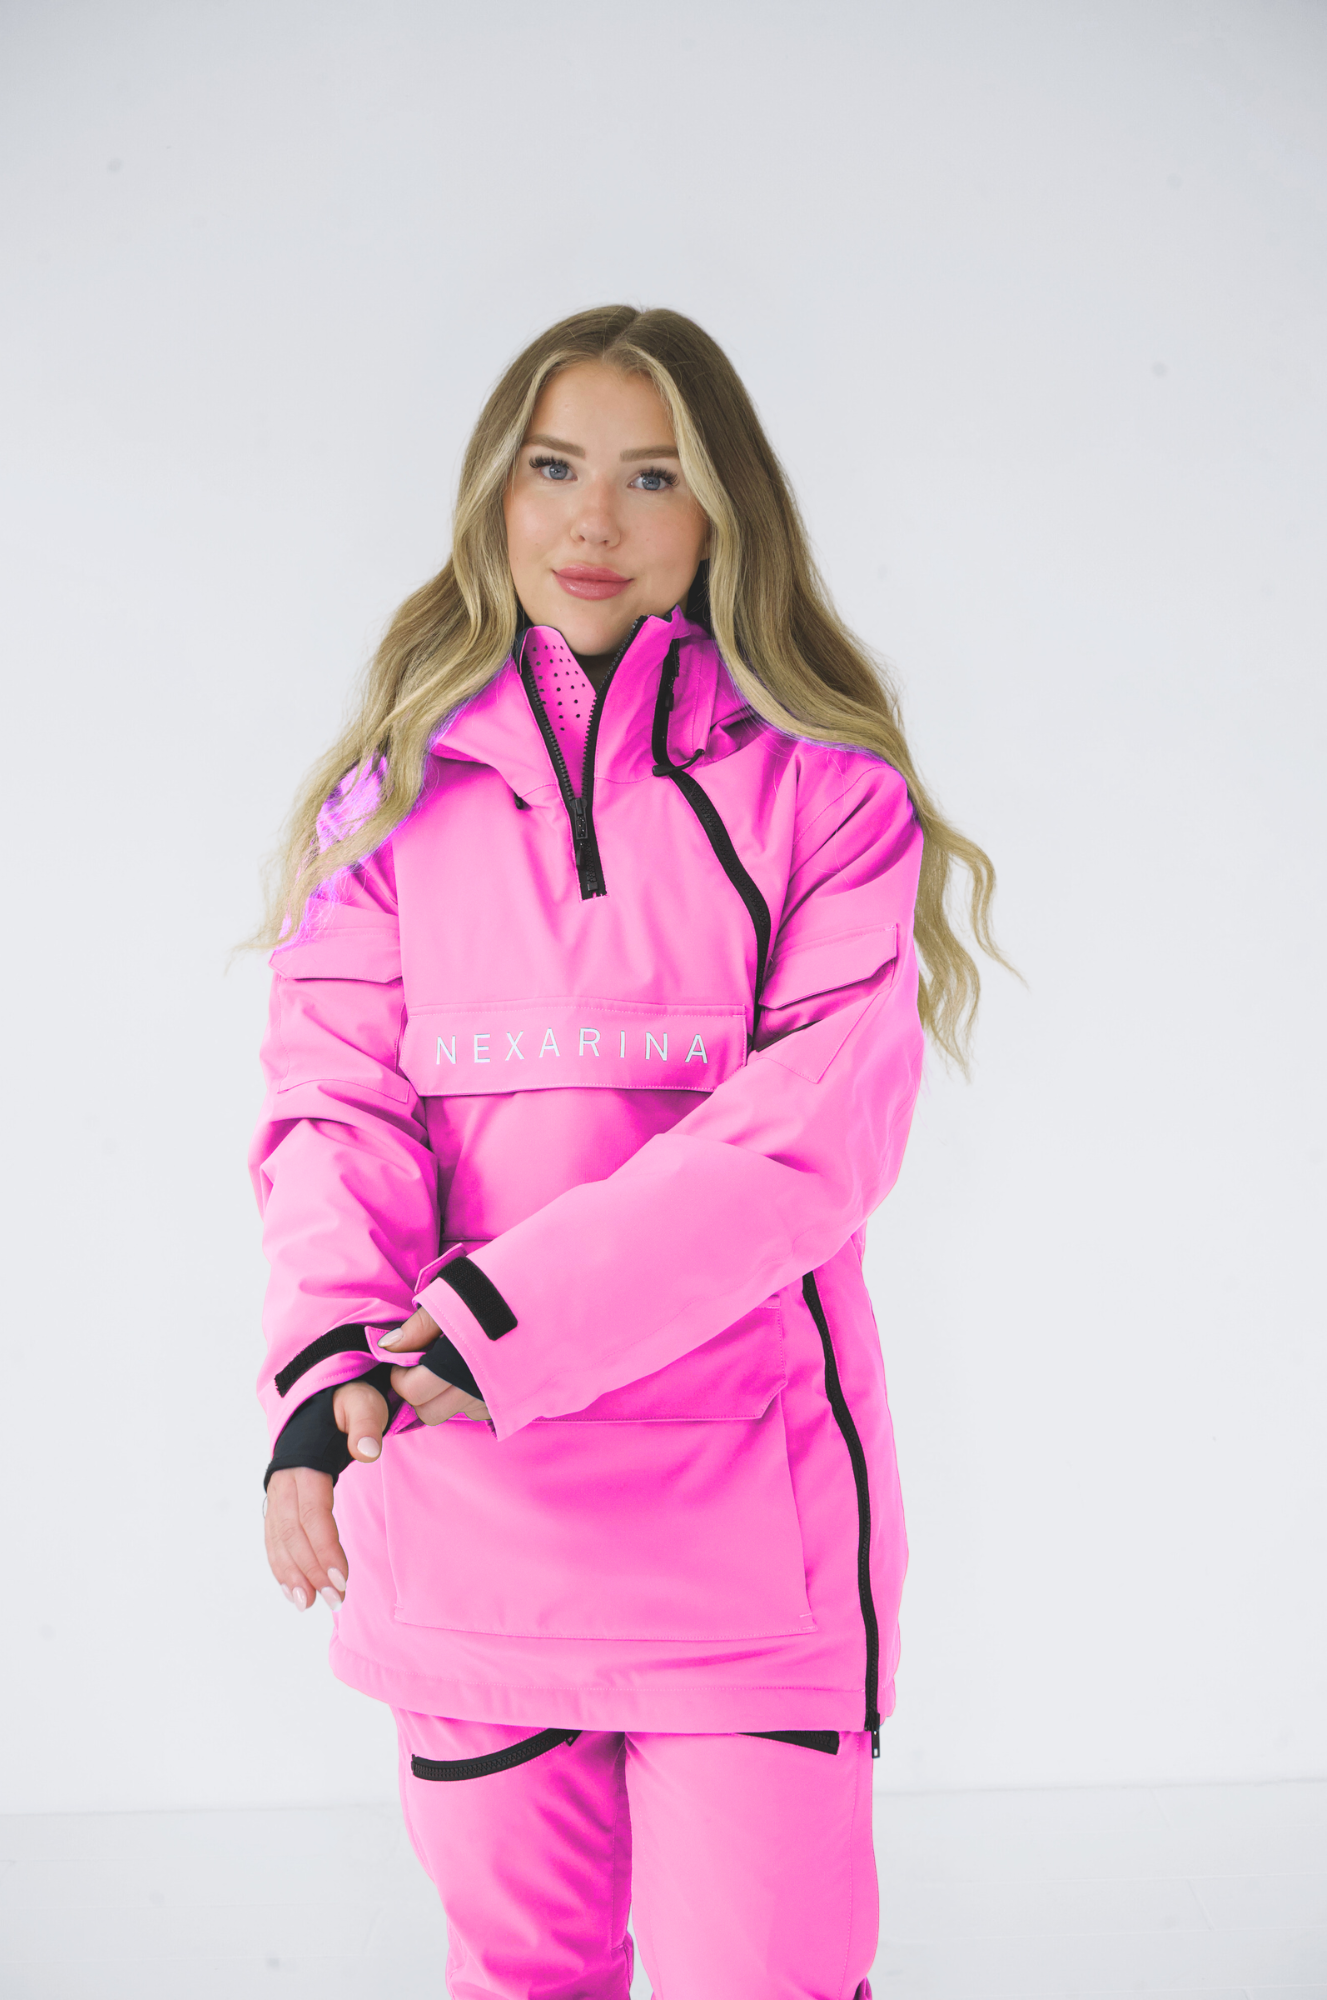 Woman in a pink Nexarina ski jacket standing with arms crossed, smiling towards the camera, against a white background.